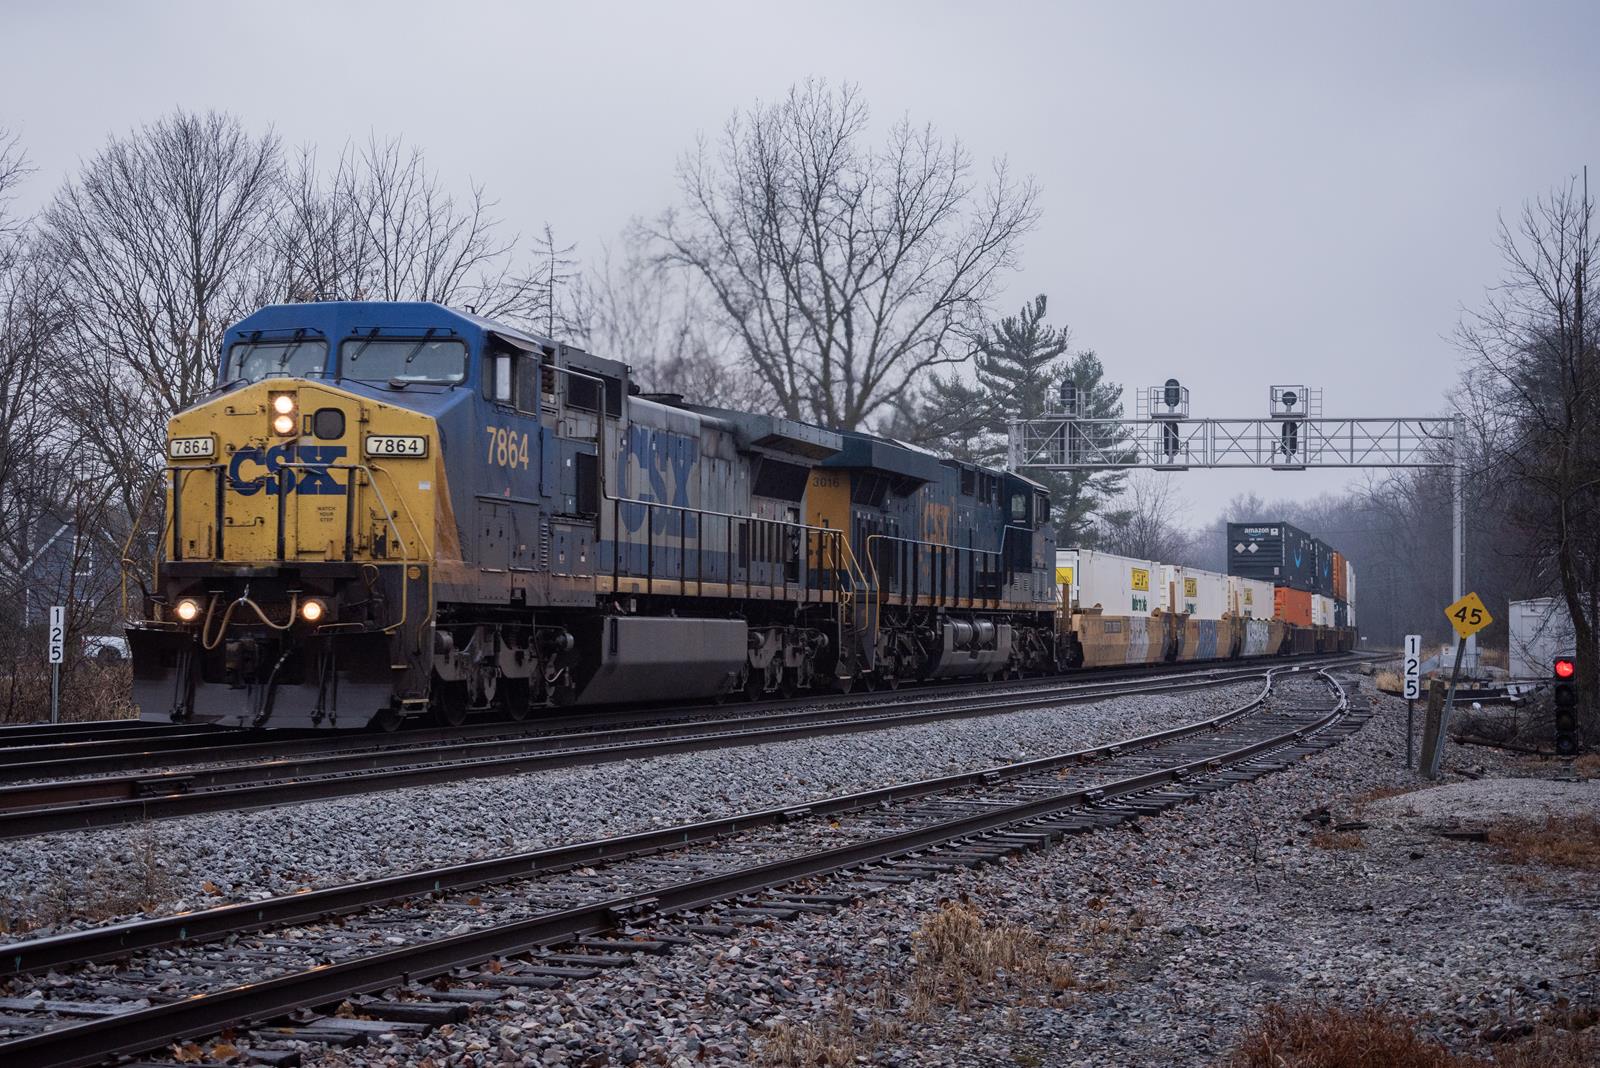 CSXT 7864 is a class GE C40-8W (Dash 8-40CW) and  is pictured in Auburn, Indiana, USA.  This was taken along the Garrett Subdivision on the CSX Transportation. Photo Copyright: Spencer Harman uploaded to Railroad Gallery on 11/27/2022. This photograph of CSXT 7864 was taken on Sunday, November 27, 2022. All Rights Reserved. 